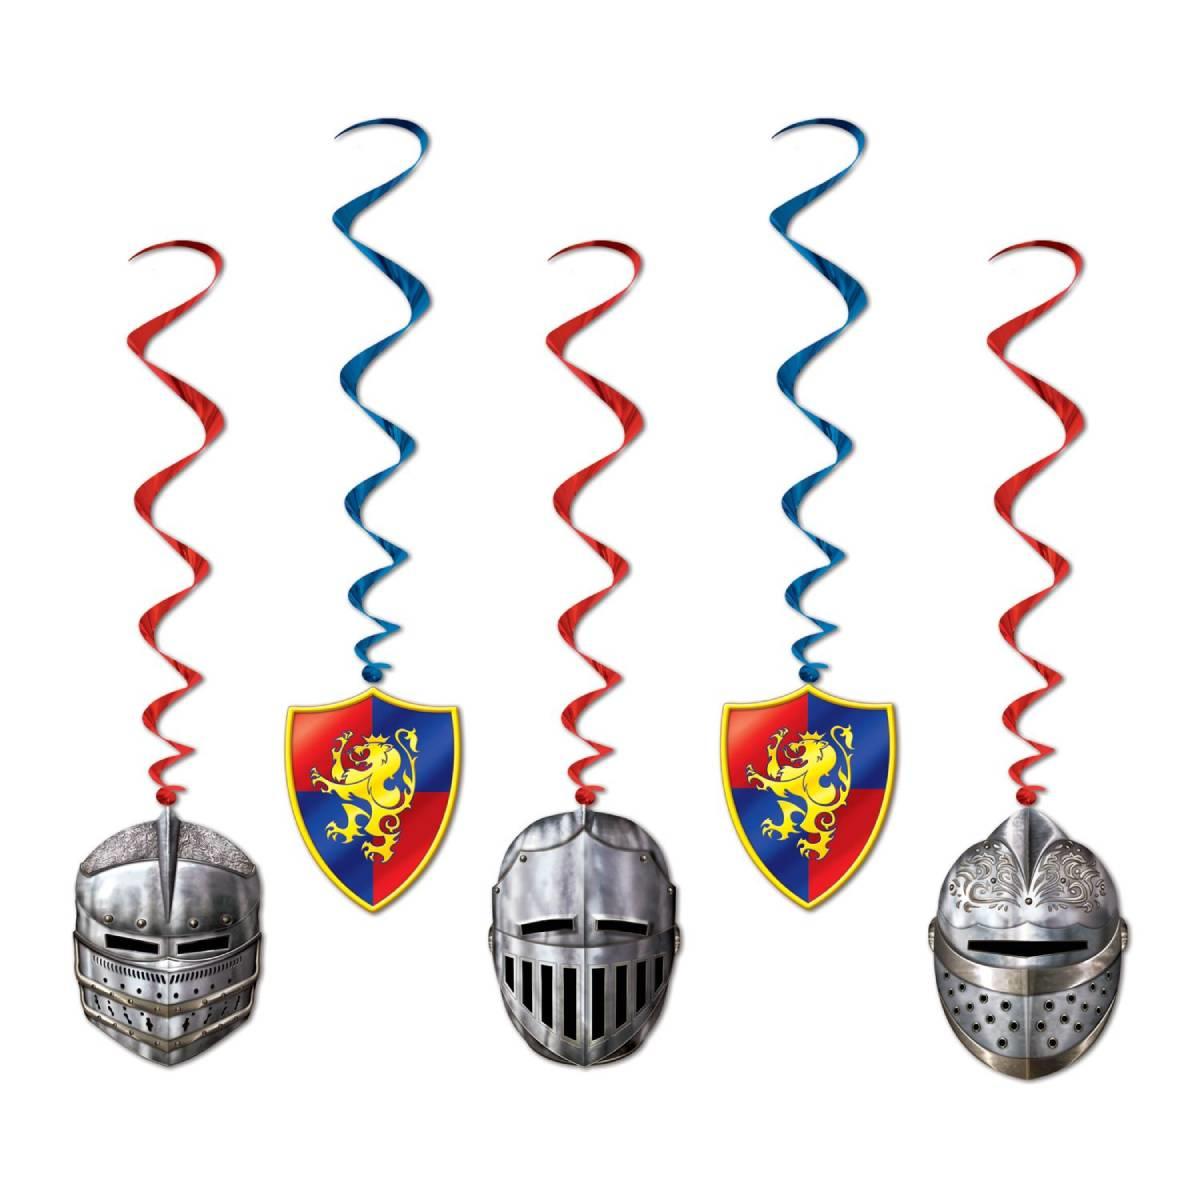 Medieval Hanging Swirl Decorations - pk5 by Beistle 57611 available here at Karnival Costumes online party shop